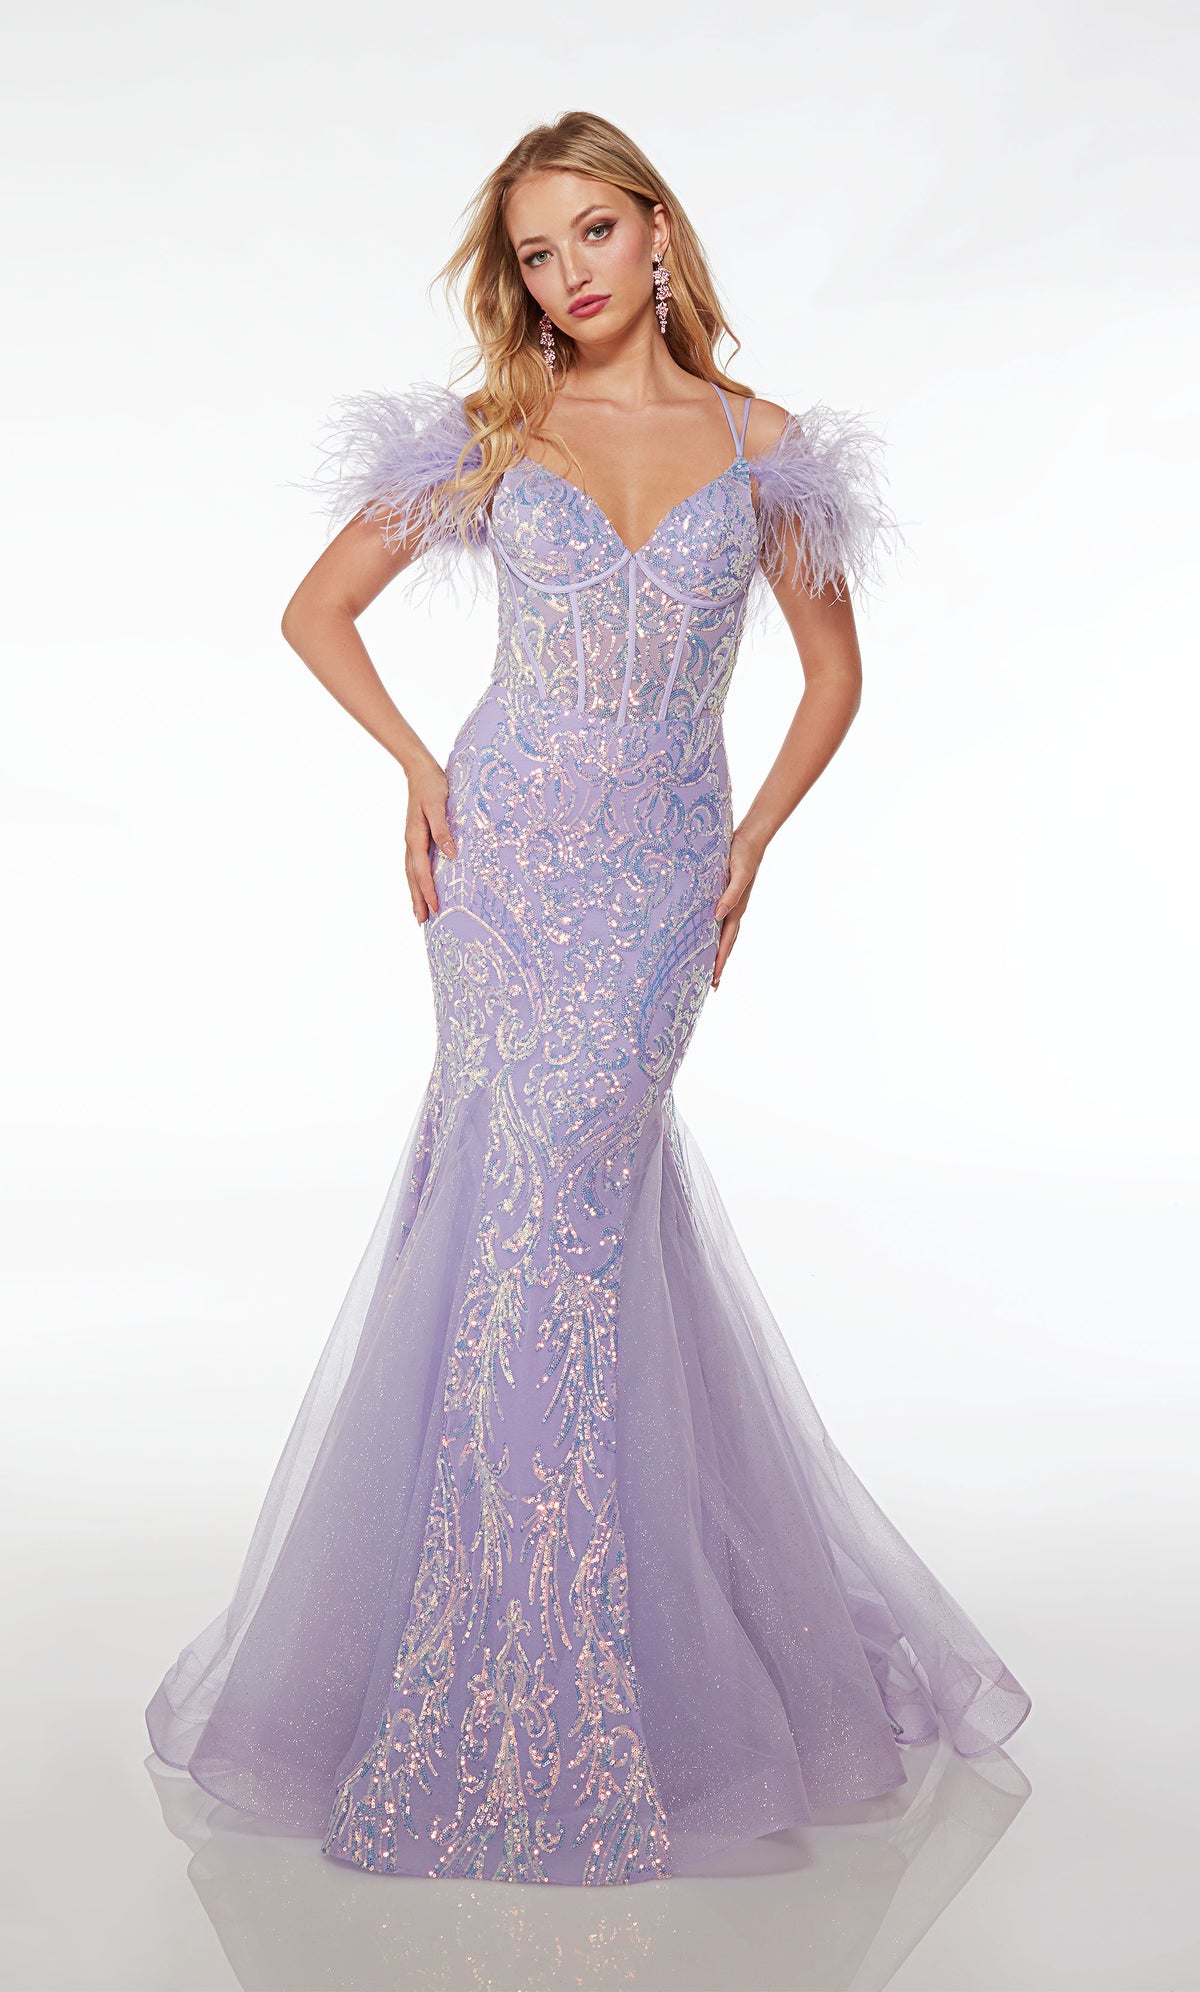 Purple prom dress with dual straps, feather trim, corset bodice, mermaid silhouette, iridescent sequin detailing, and crisscross lace-up back.